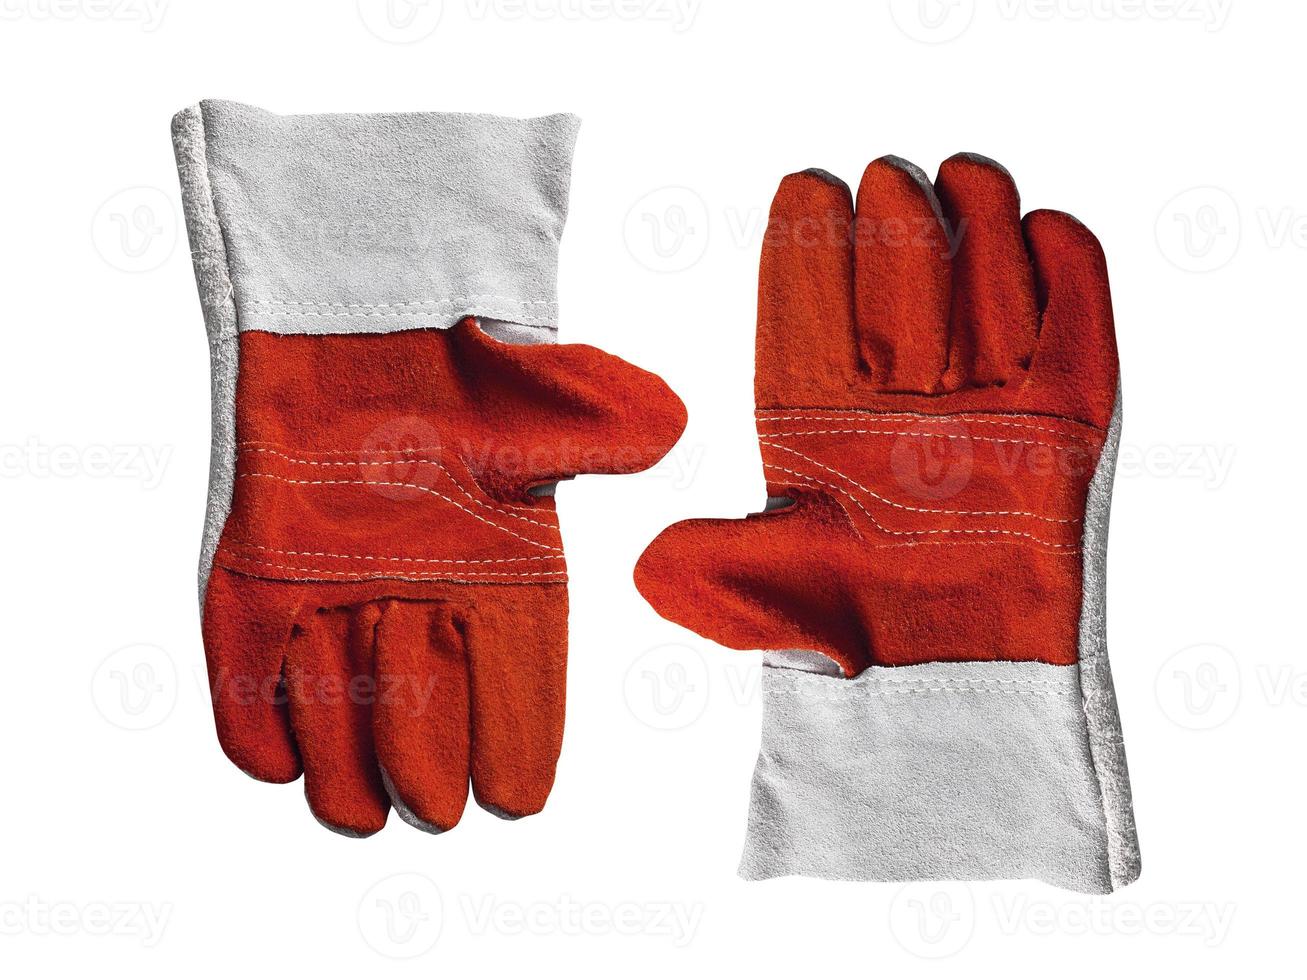 https://static.vecteezy.com/system/resources/previews/009/037/685/non_2x/construction-gloves-isolated-on-white-background-photo.jpg